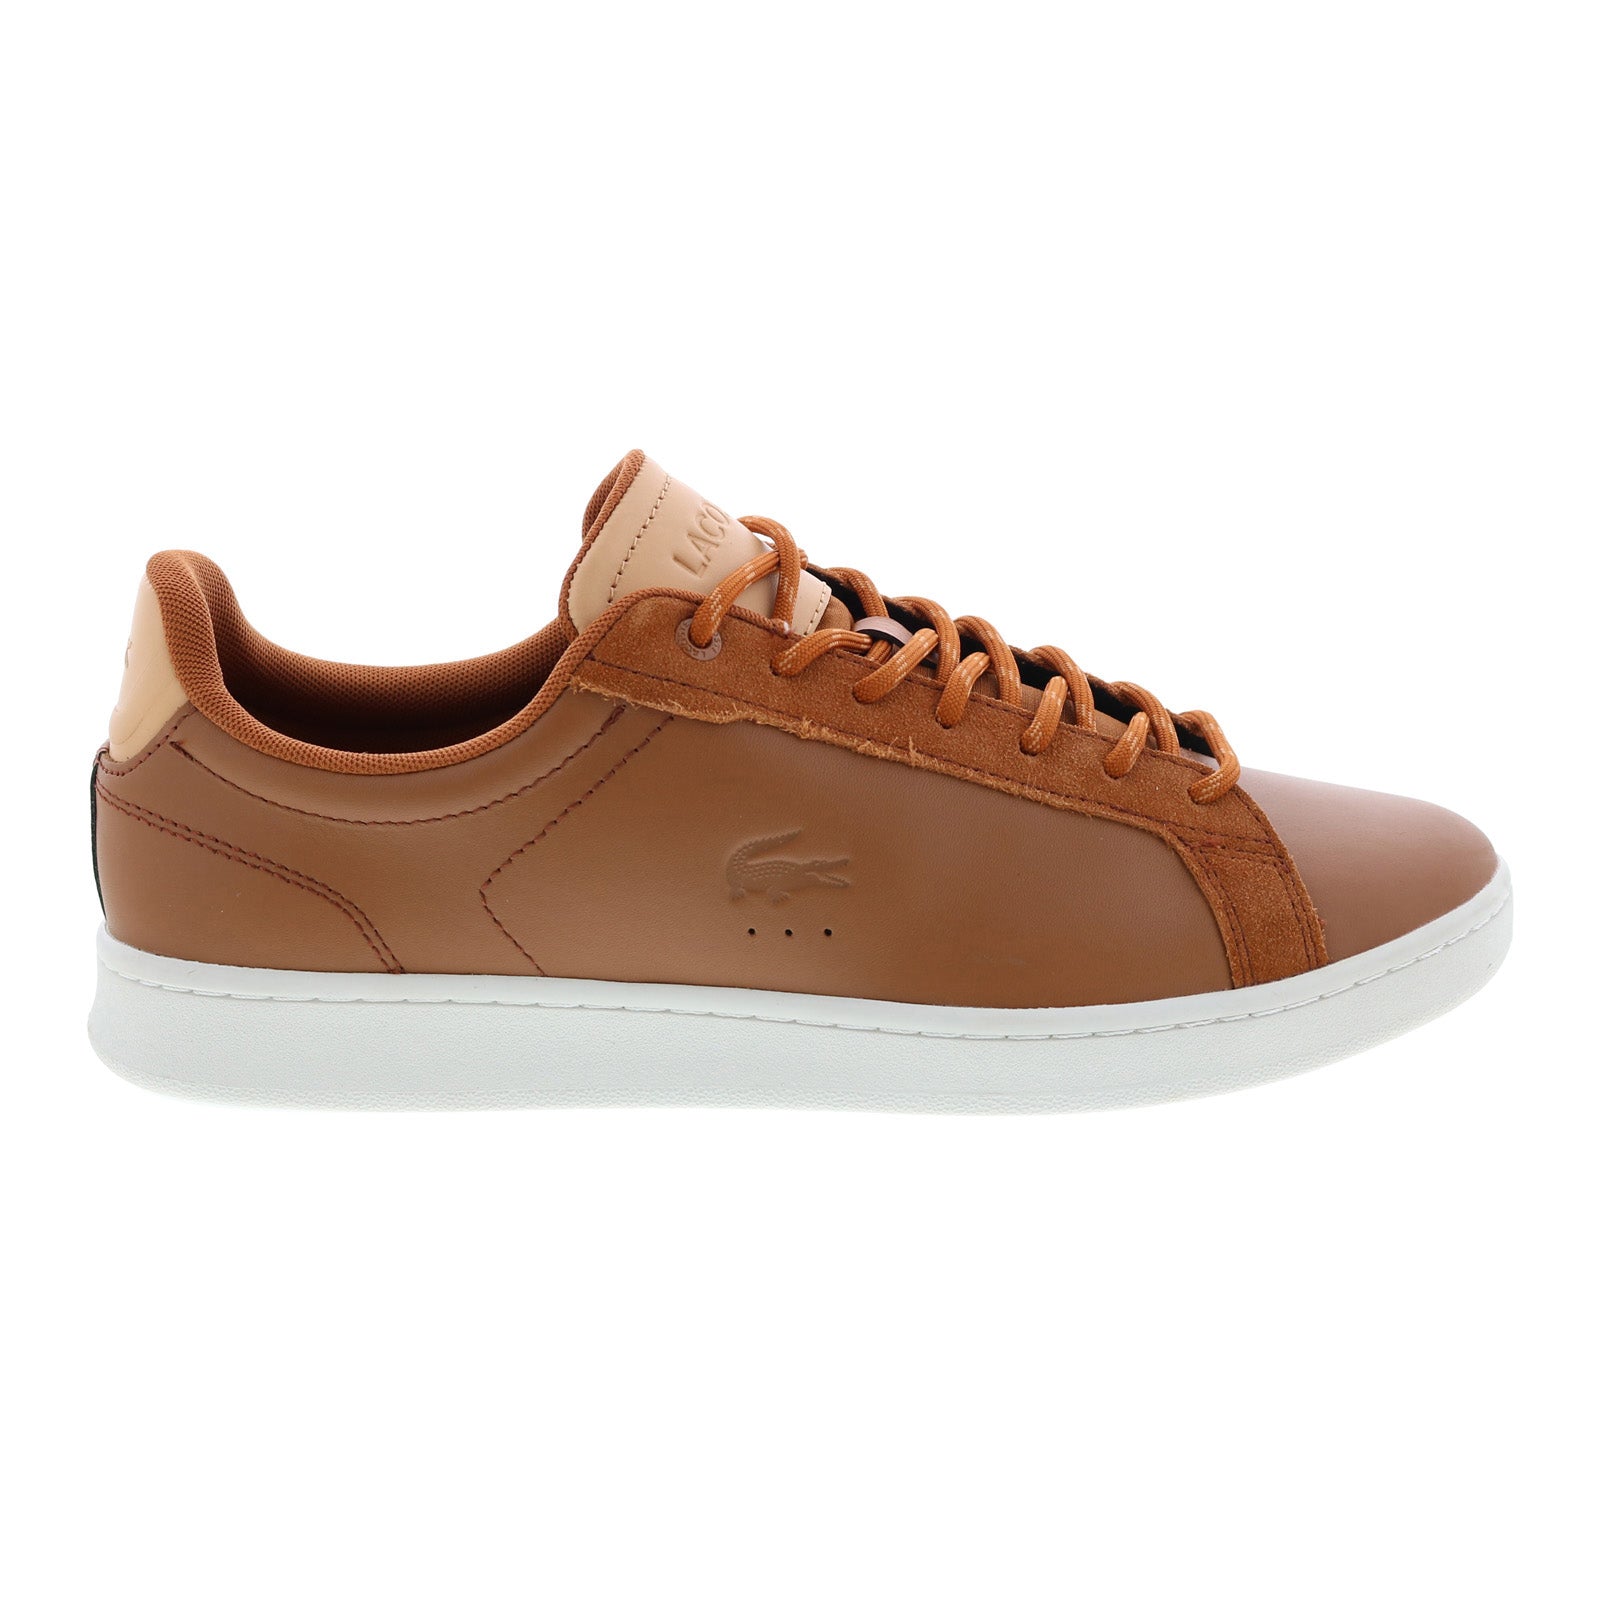 Lacoste Carnaby Pro 222 5 Mens Brown Leather Lifestyle Shoes Ruze Shoes